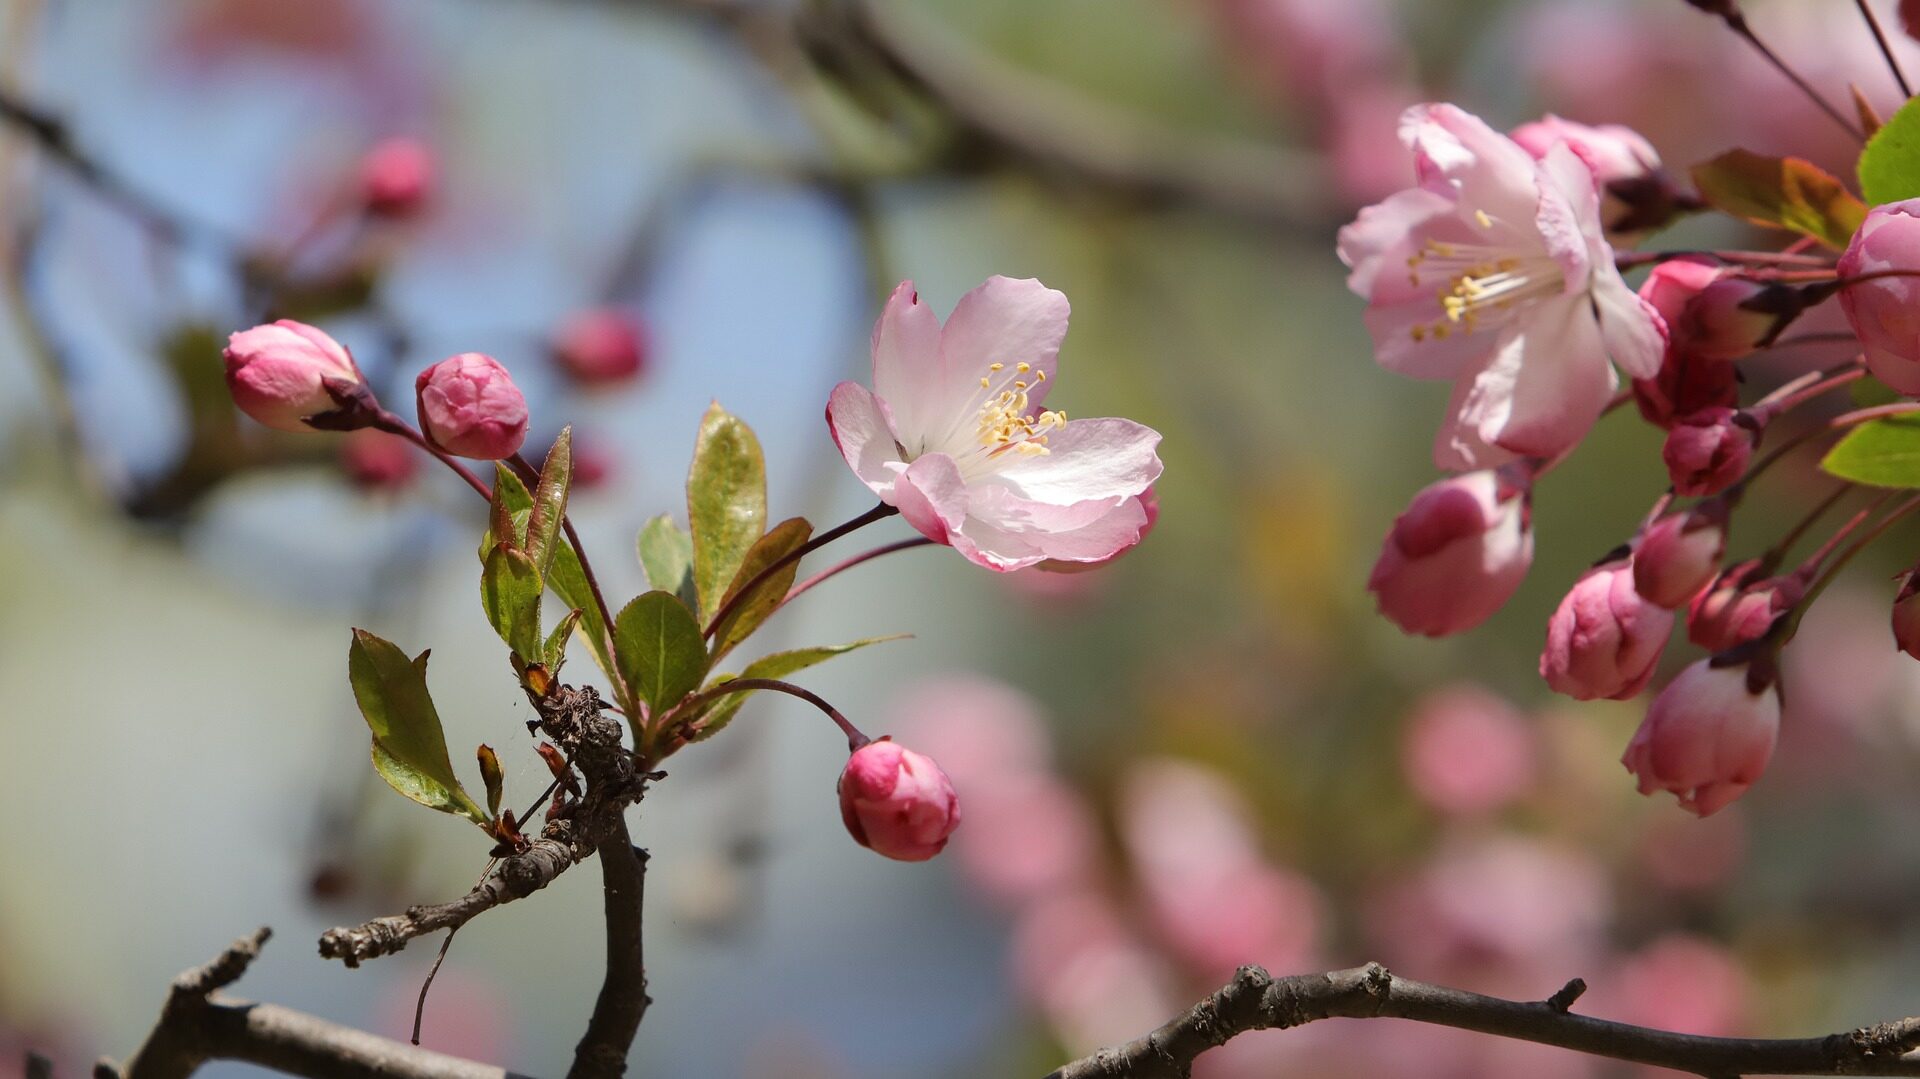 cropped-cherry-blossoms-7144310_1920.jpg